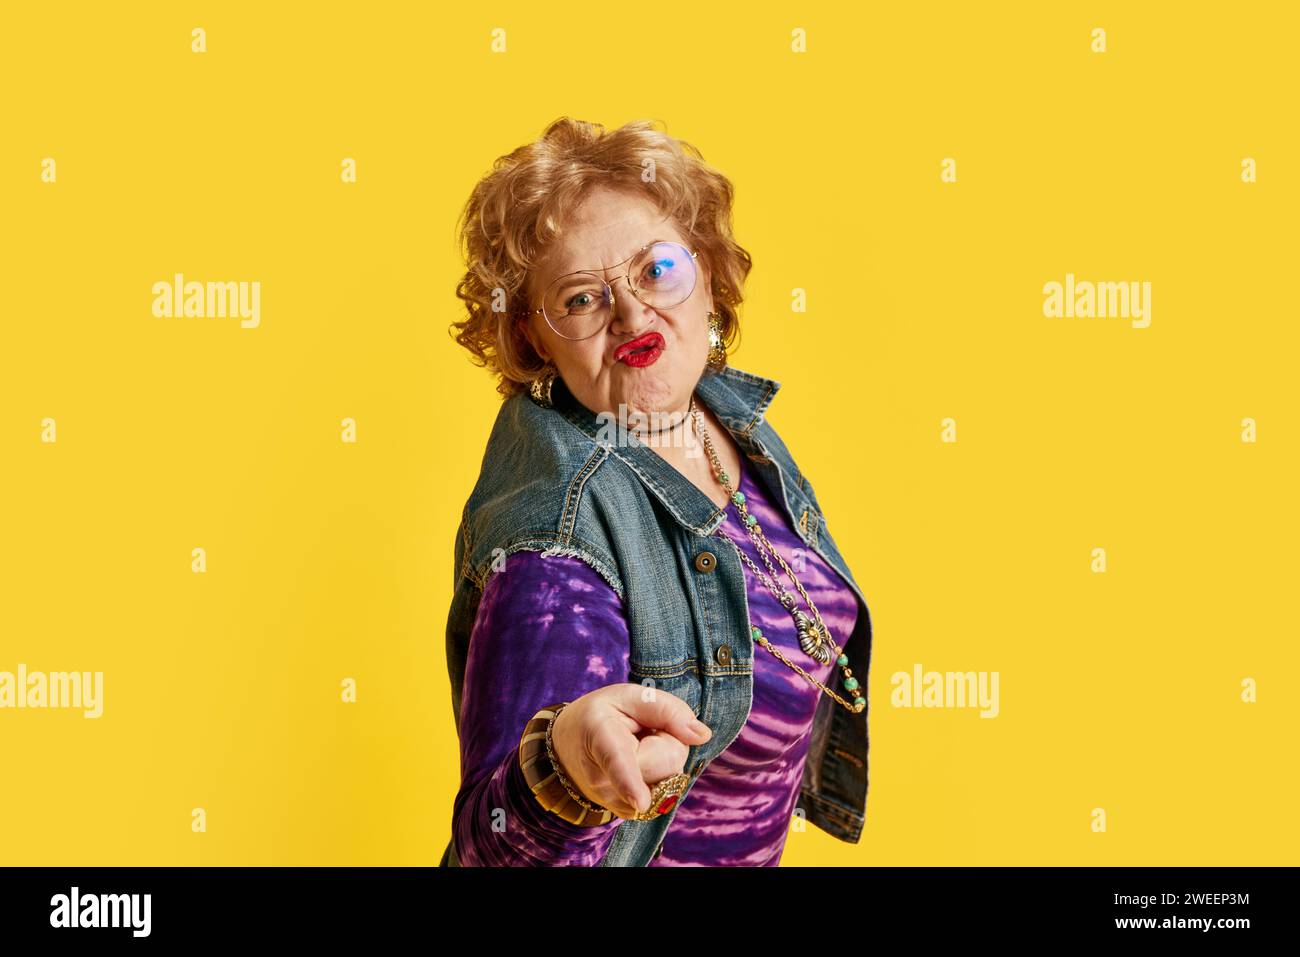 Senior woman puckering lips in round glasses dressed denim jacket, purple T-shirt with gold jewelry against yellow background. Stock Photo